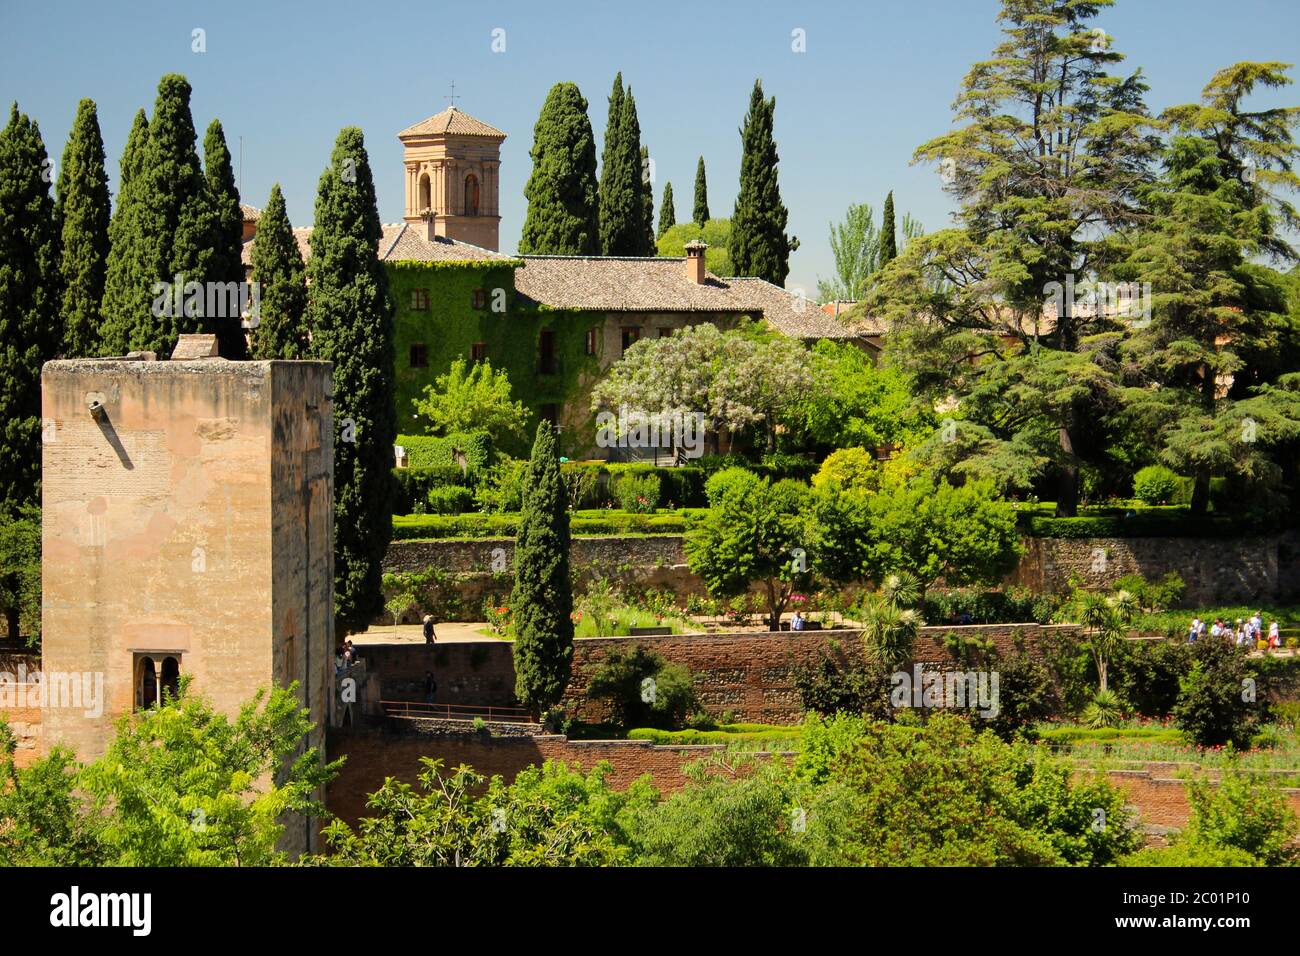 Inside Alhambra Palace in Spain Stock Photo by ©pocholocalapre@yahoo.com  104192066